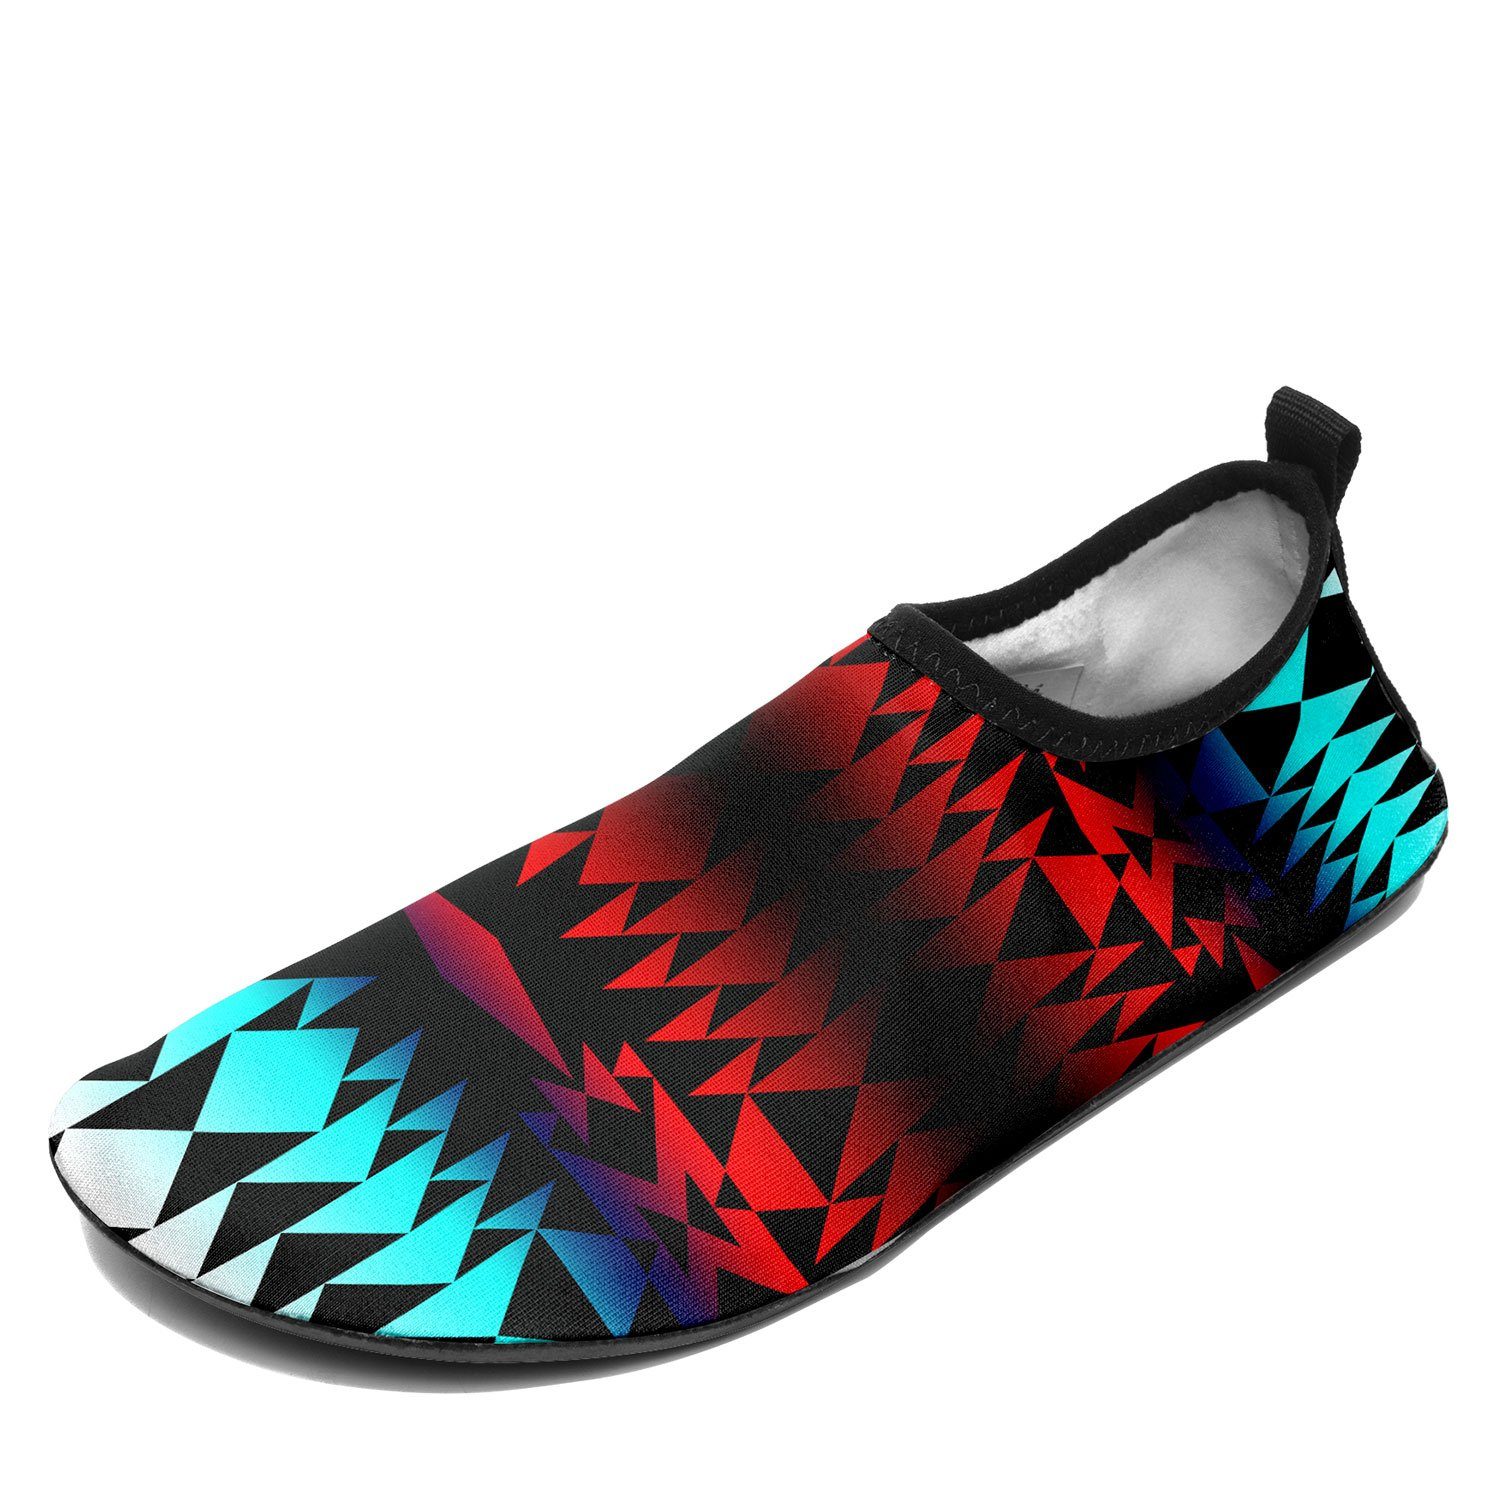 In Between Two Worlds Sockamoccs Slip On Shoes Herman 